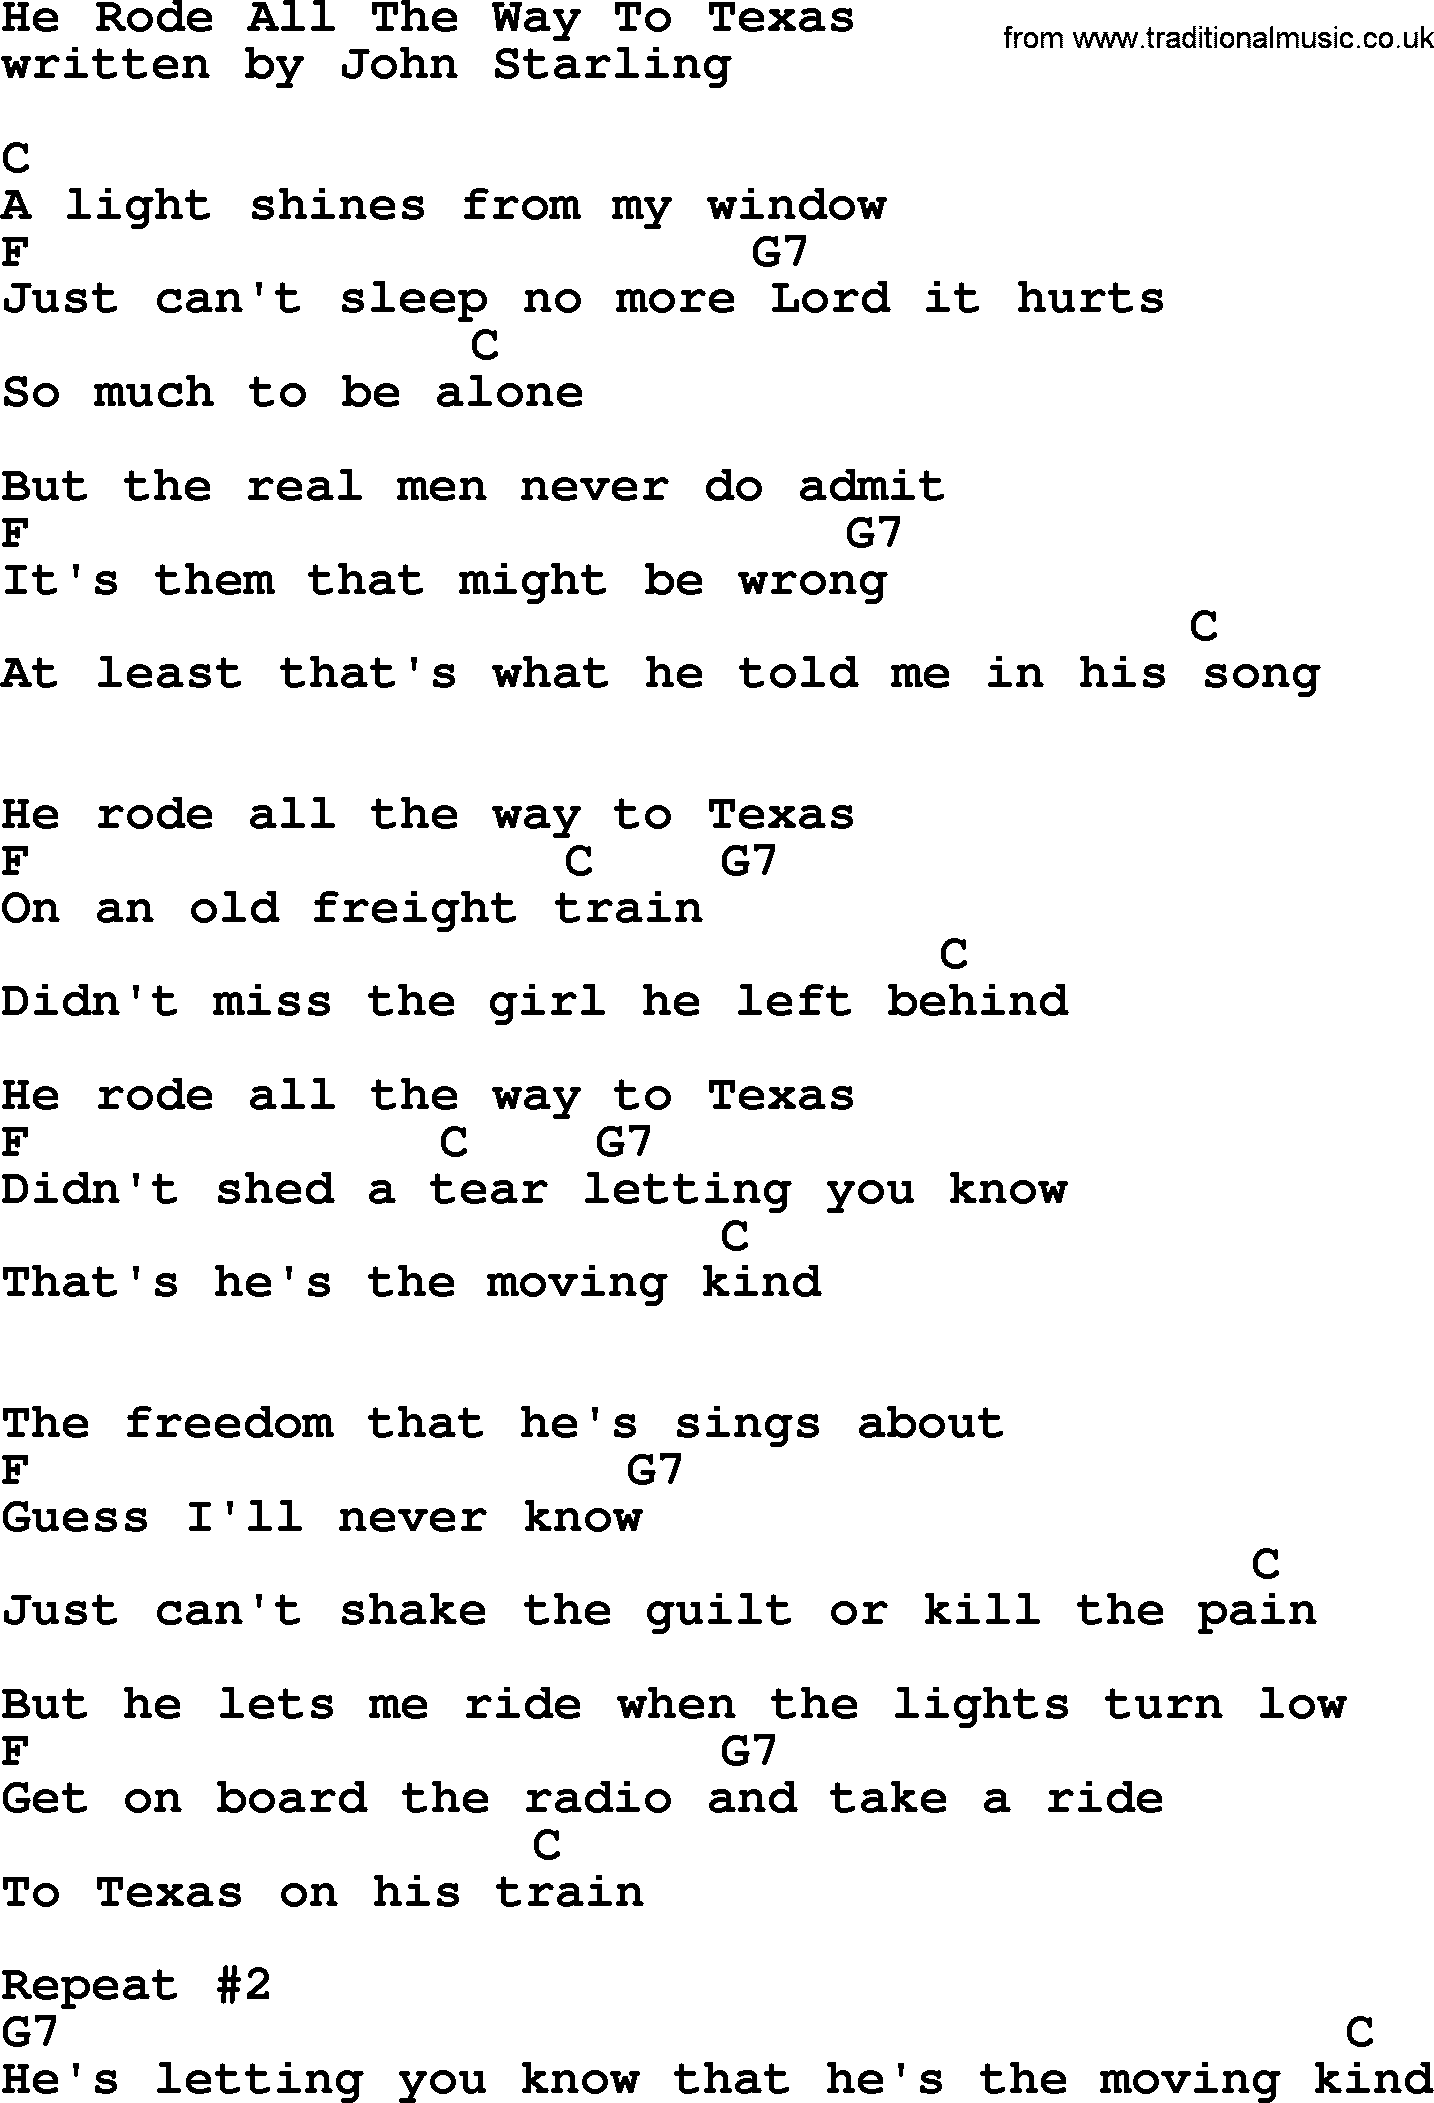 Dolly Parton song He Rode All The Way To Texas, lyrics and chords